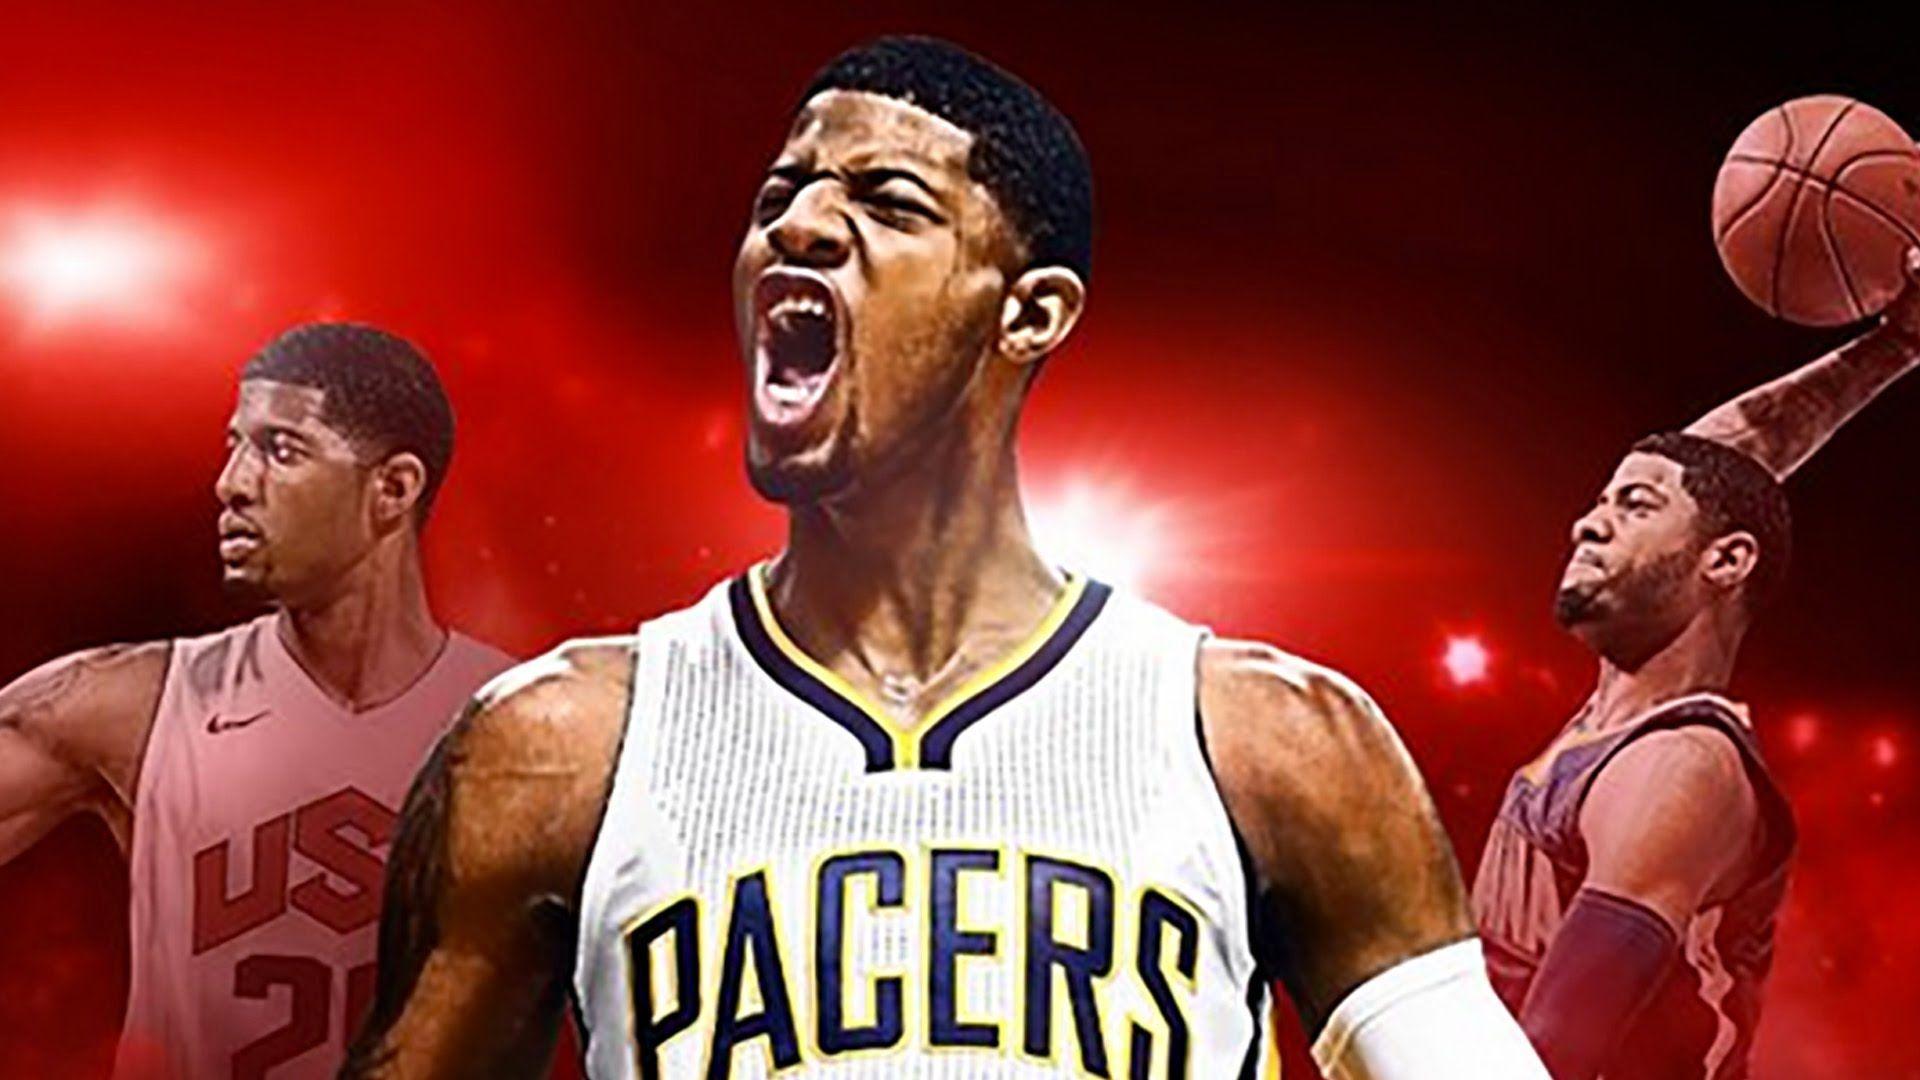 Paul George On Cover of NBA 2K17